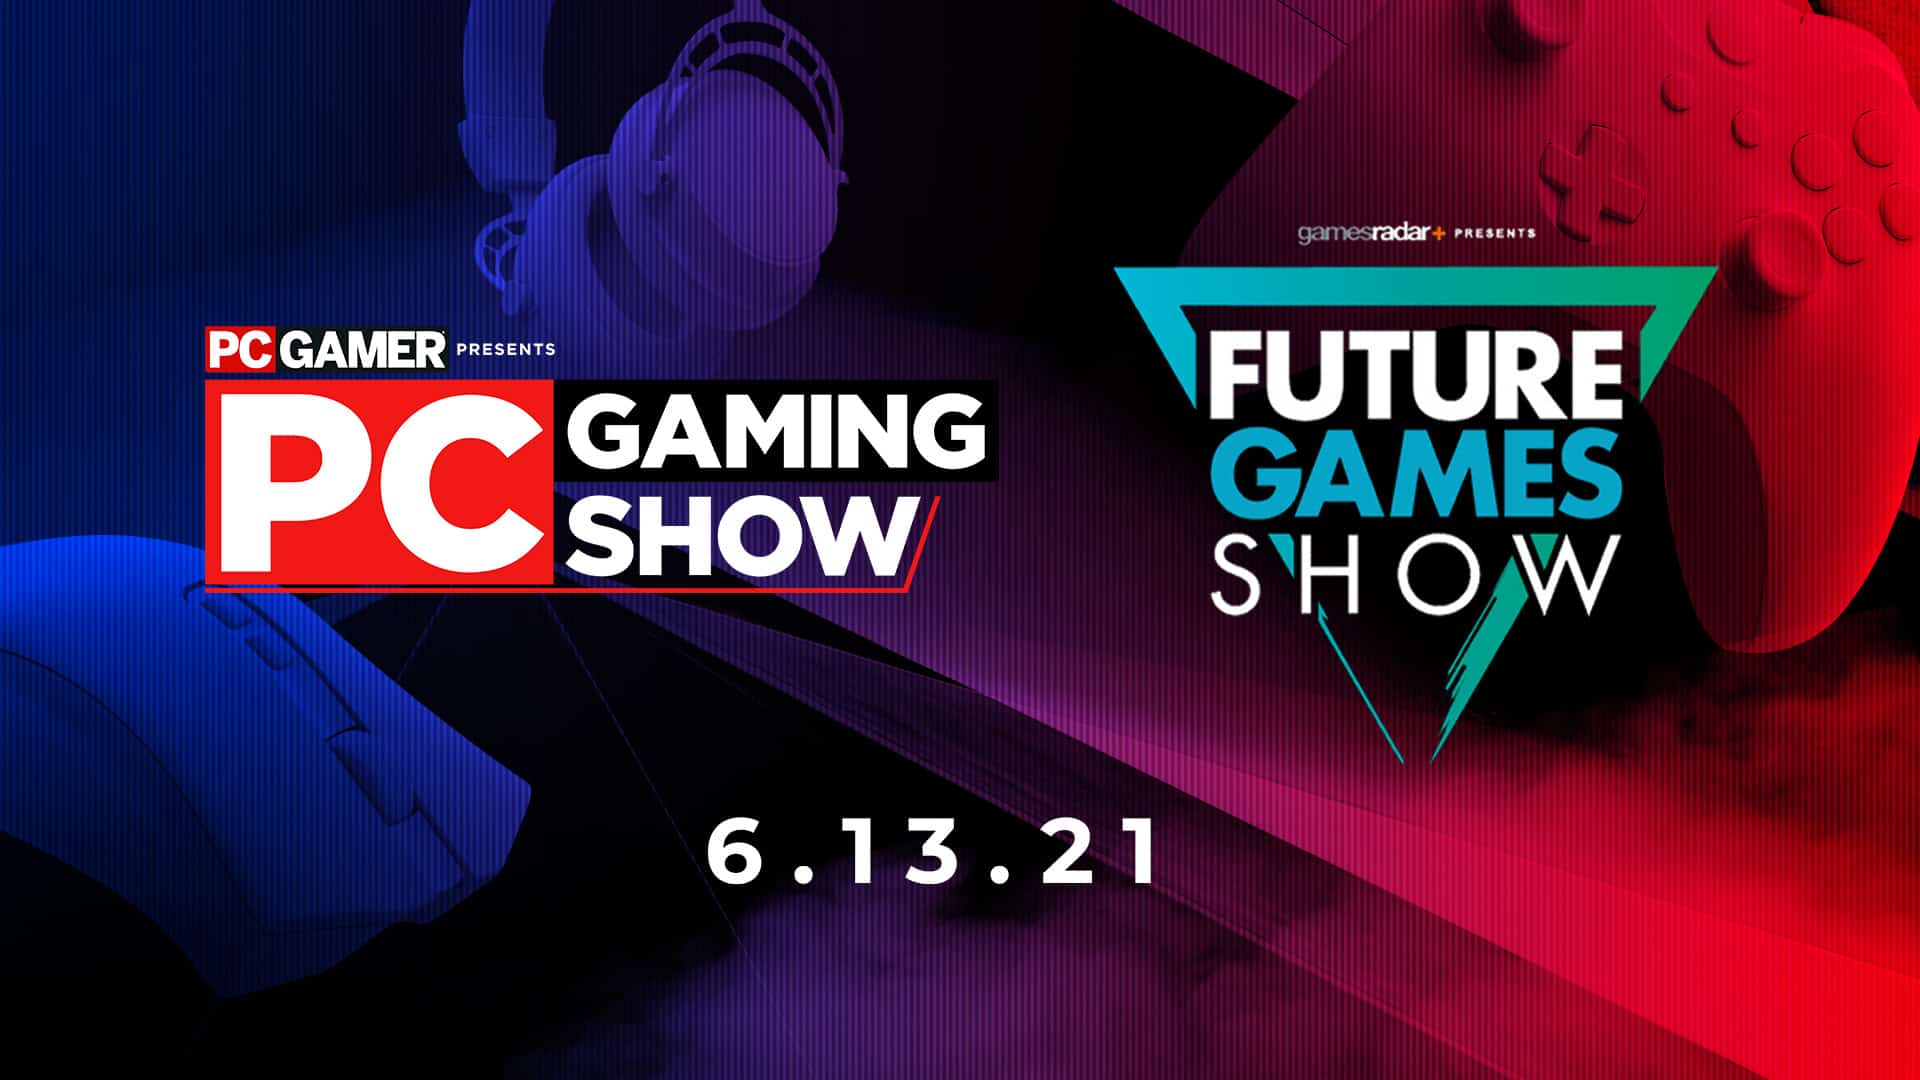 PC Gaming Show 2021 and Future Games Show Banner